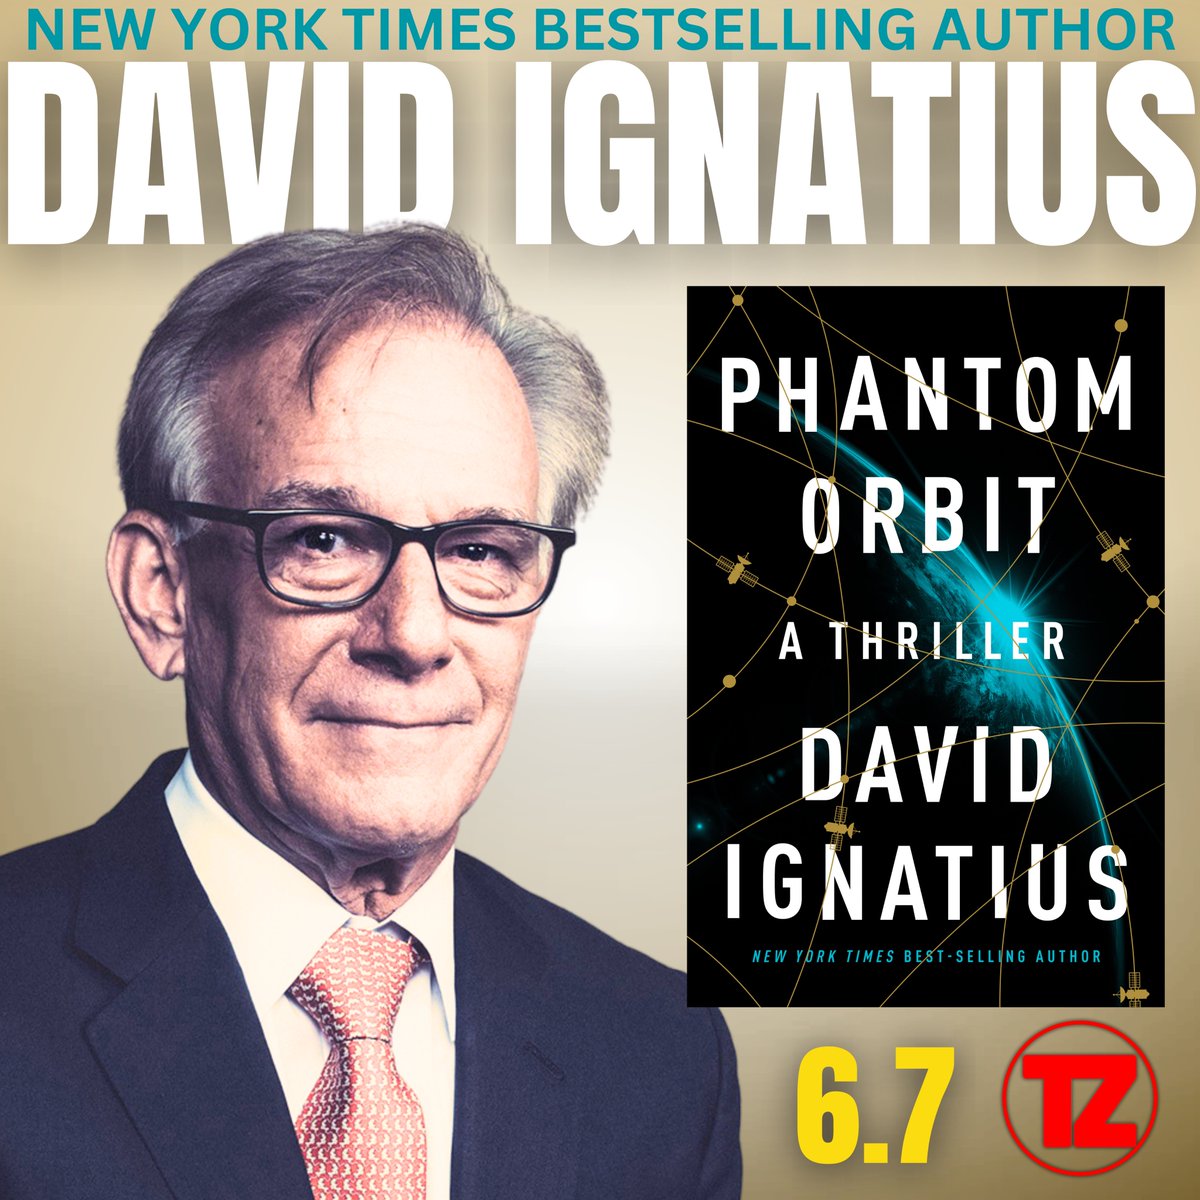 COMING IN JUNE: @IgnatiusPost, columnist for the @washingtonpost & the @nytimes #bestsellingauthor of 12 thrillers. Join us as we chat up his latest: #PhantomOrbit a book that feels like any one of today's top headlines right now. Because it IS!
#Russia #China #satellites #war